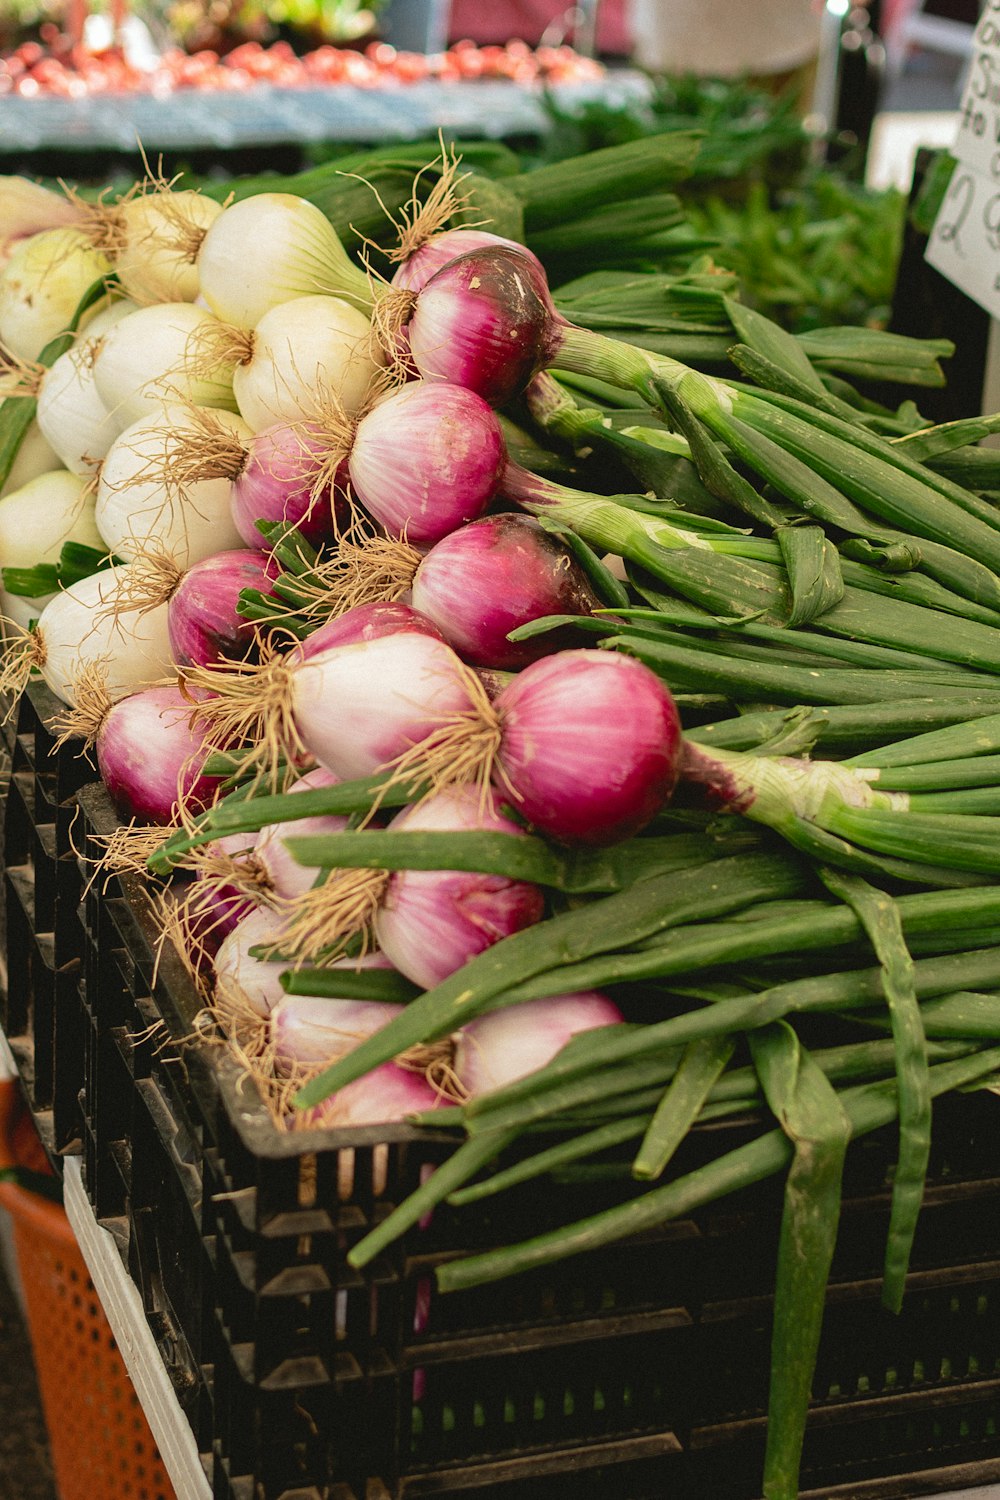 a bunch of onions are on display at a market